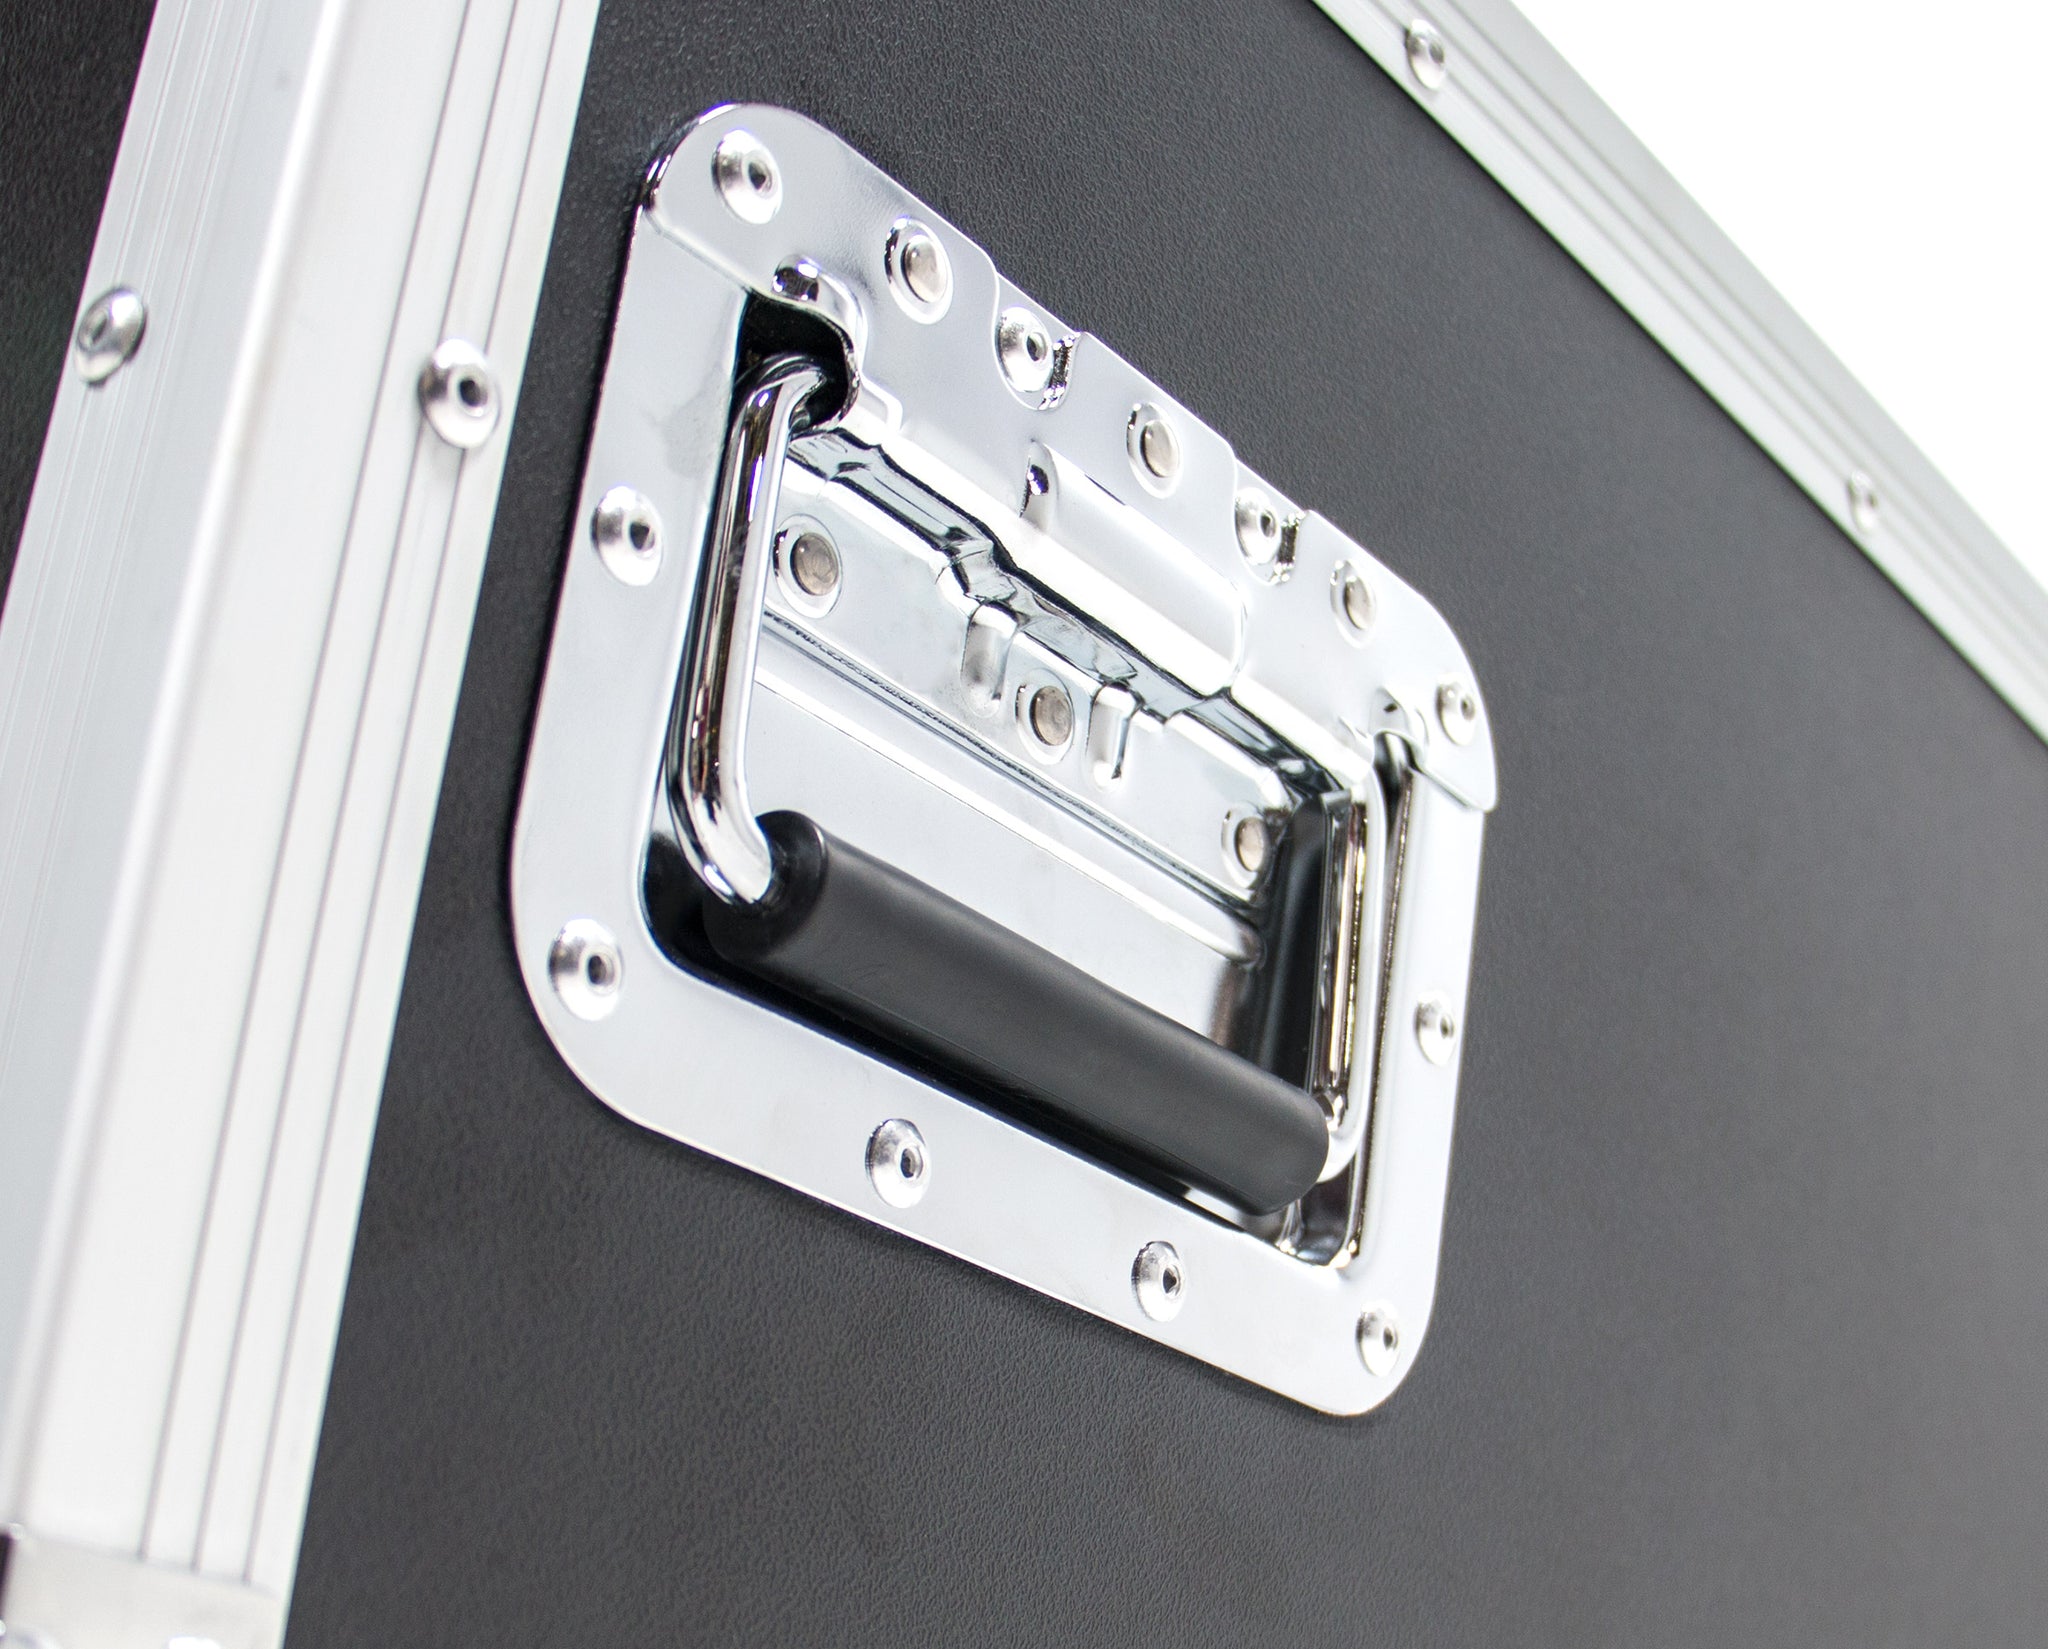 OSP PRO-WORK-SXS ATA Side by Side Drawer Case